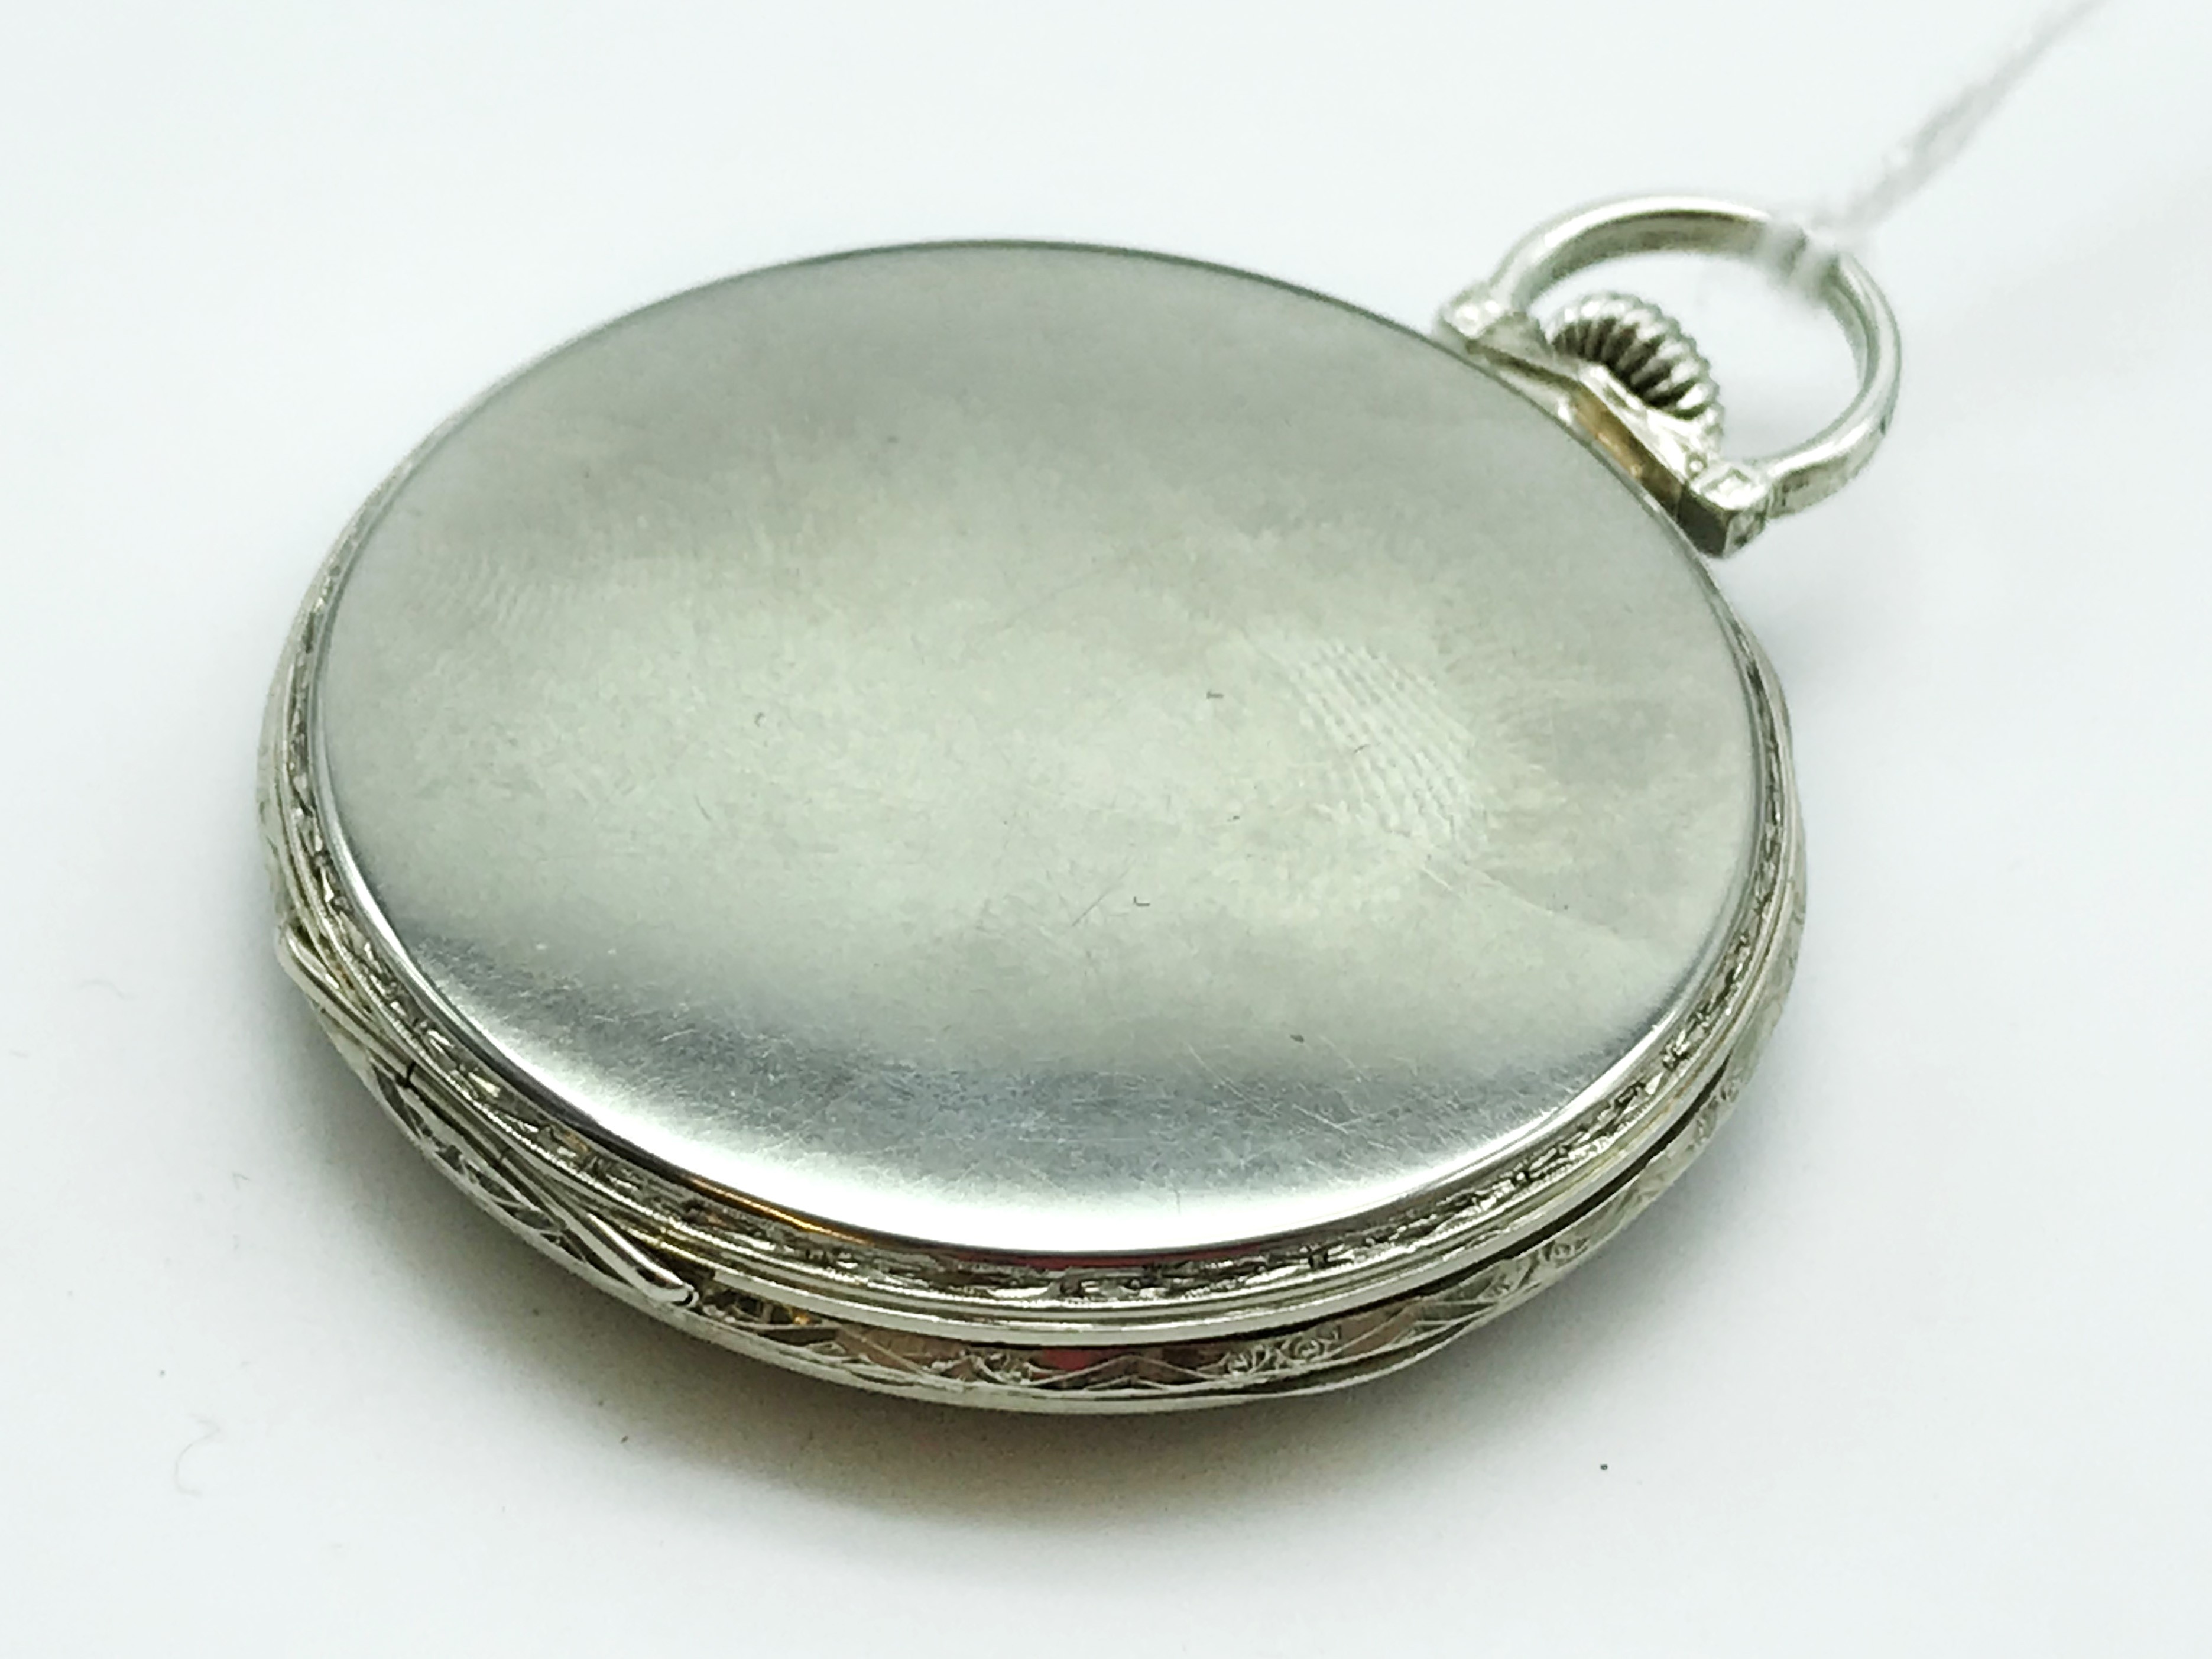 14 CARAT WHITE GOLD POCKET WATCH IN WORKING CONDITION - Image 6 of 10